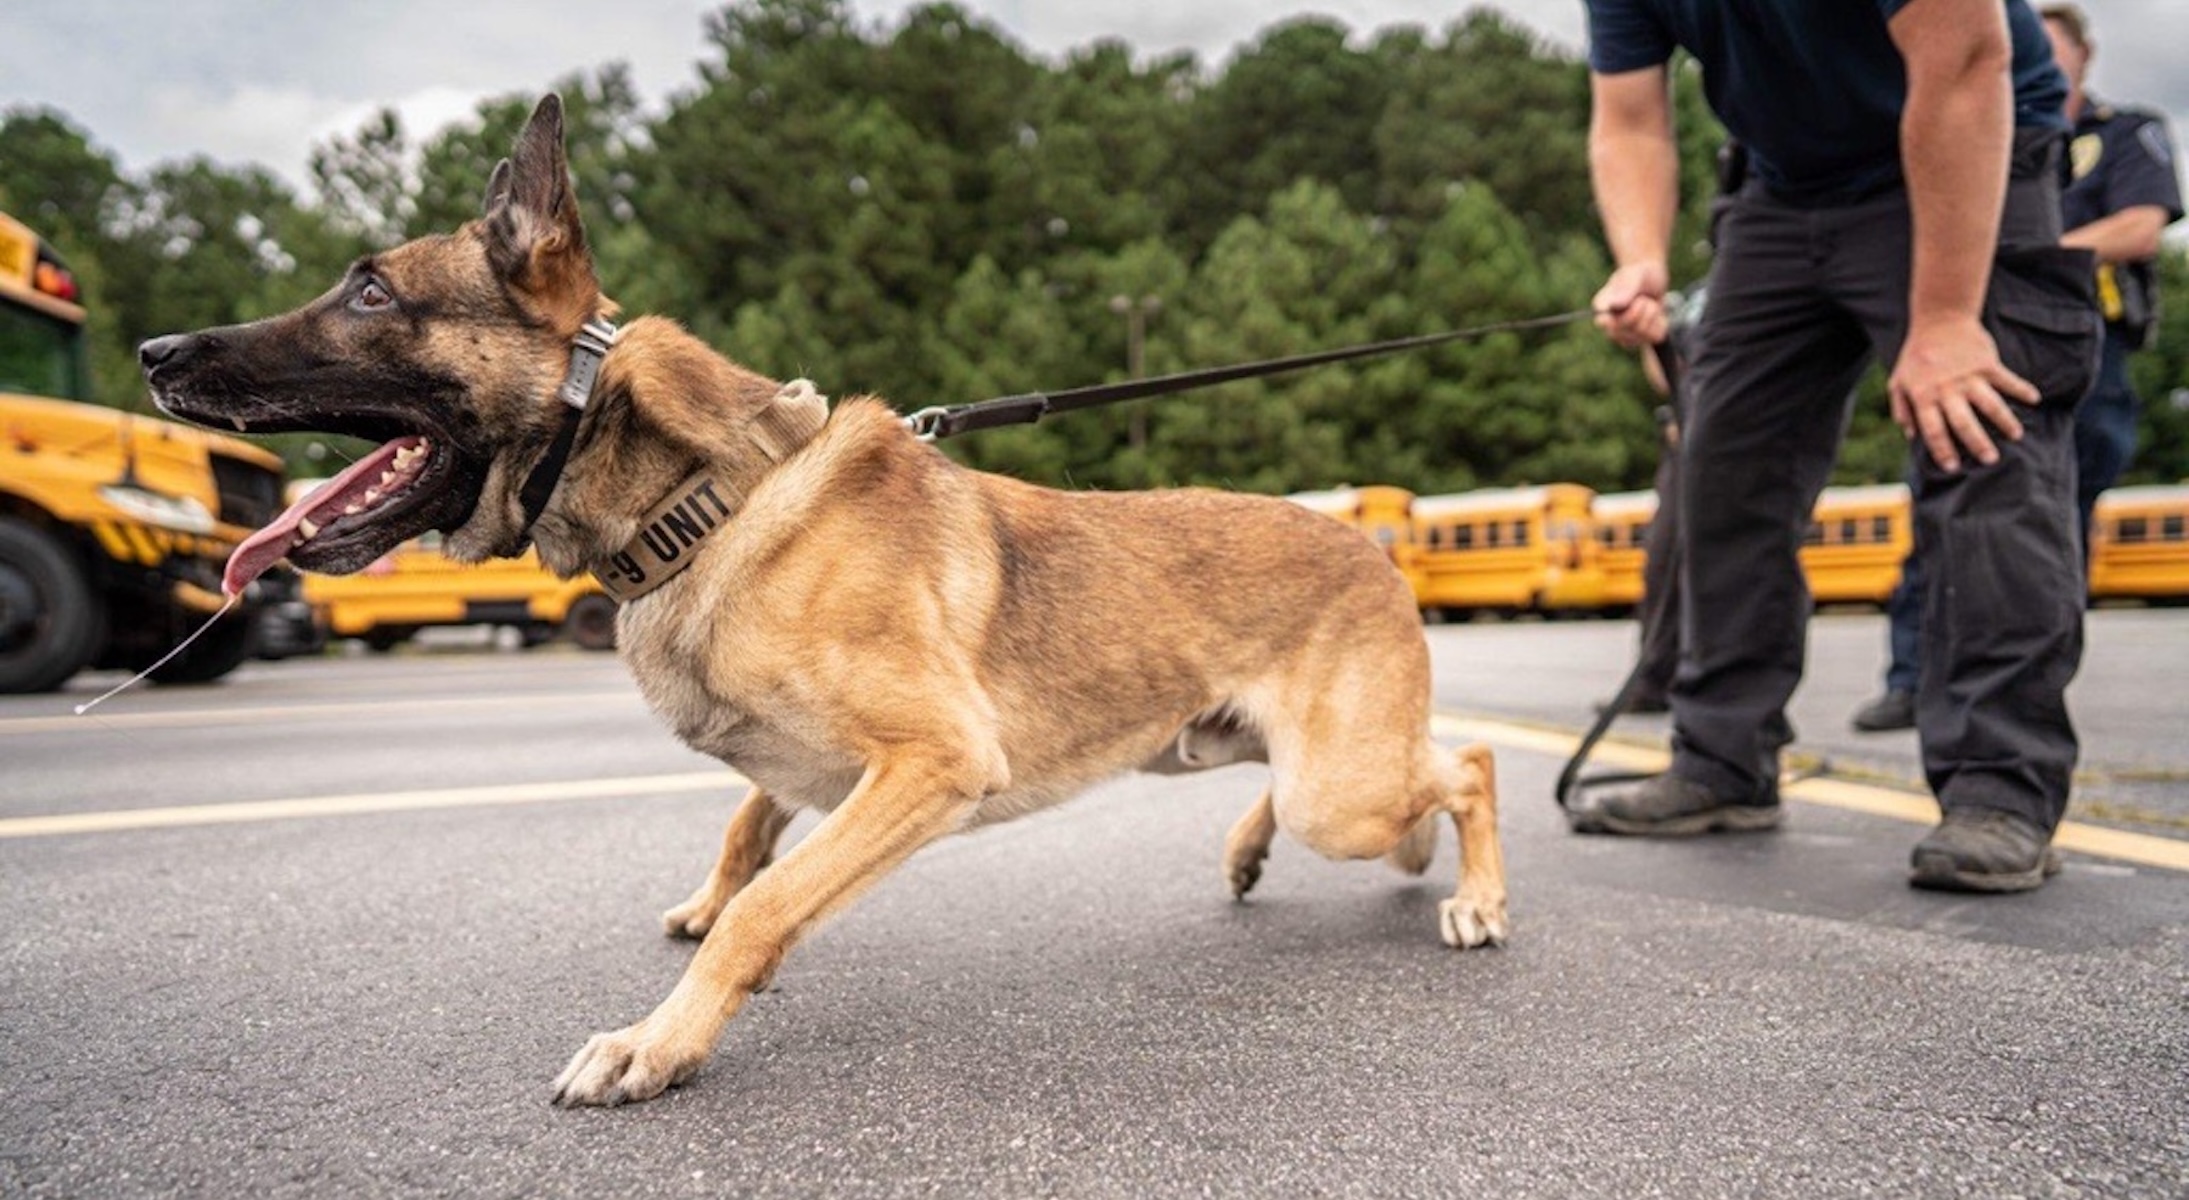 Track Location and Movement of K9 Officers in Any Environment